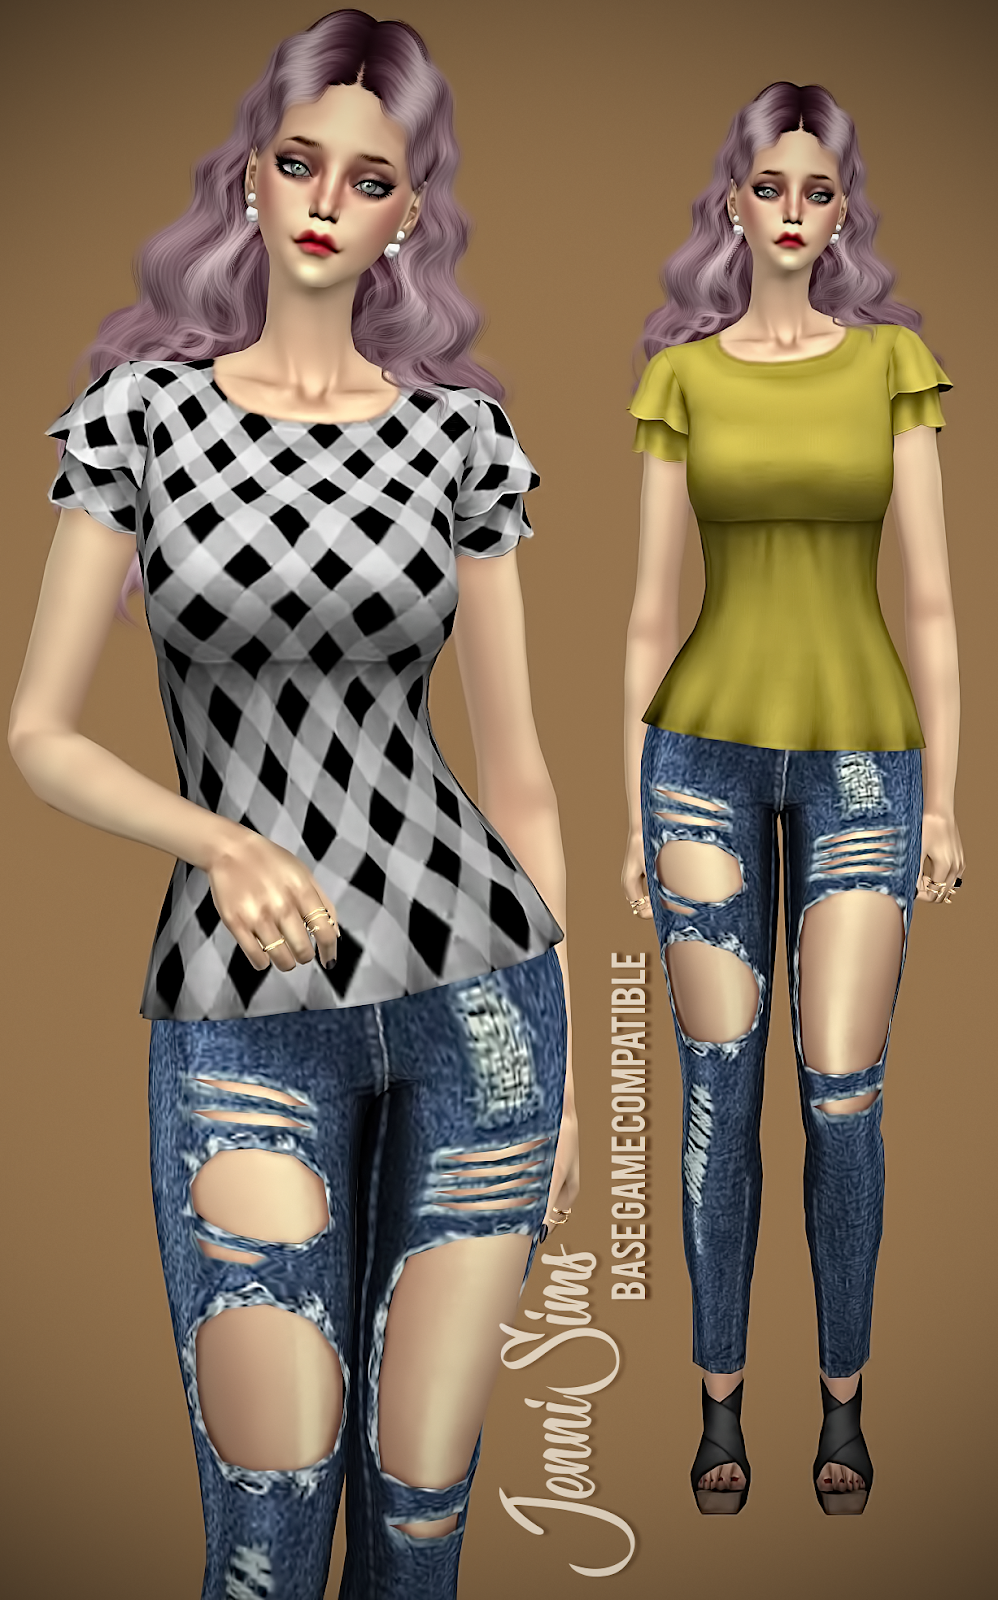 Downloads sims 4:Base Game compatible Blouse Spring Kiss | JenniSims